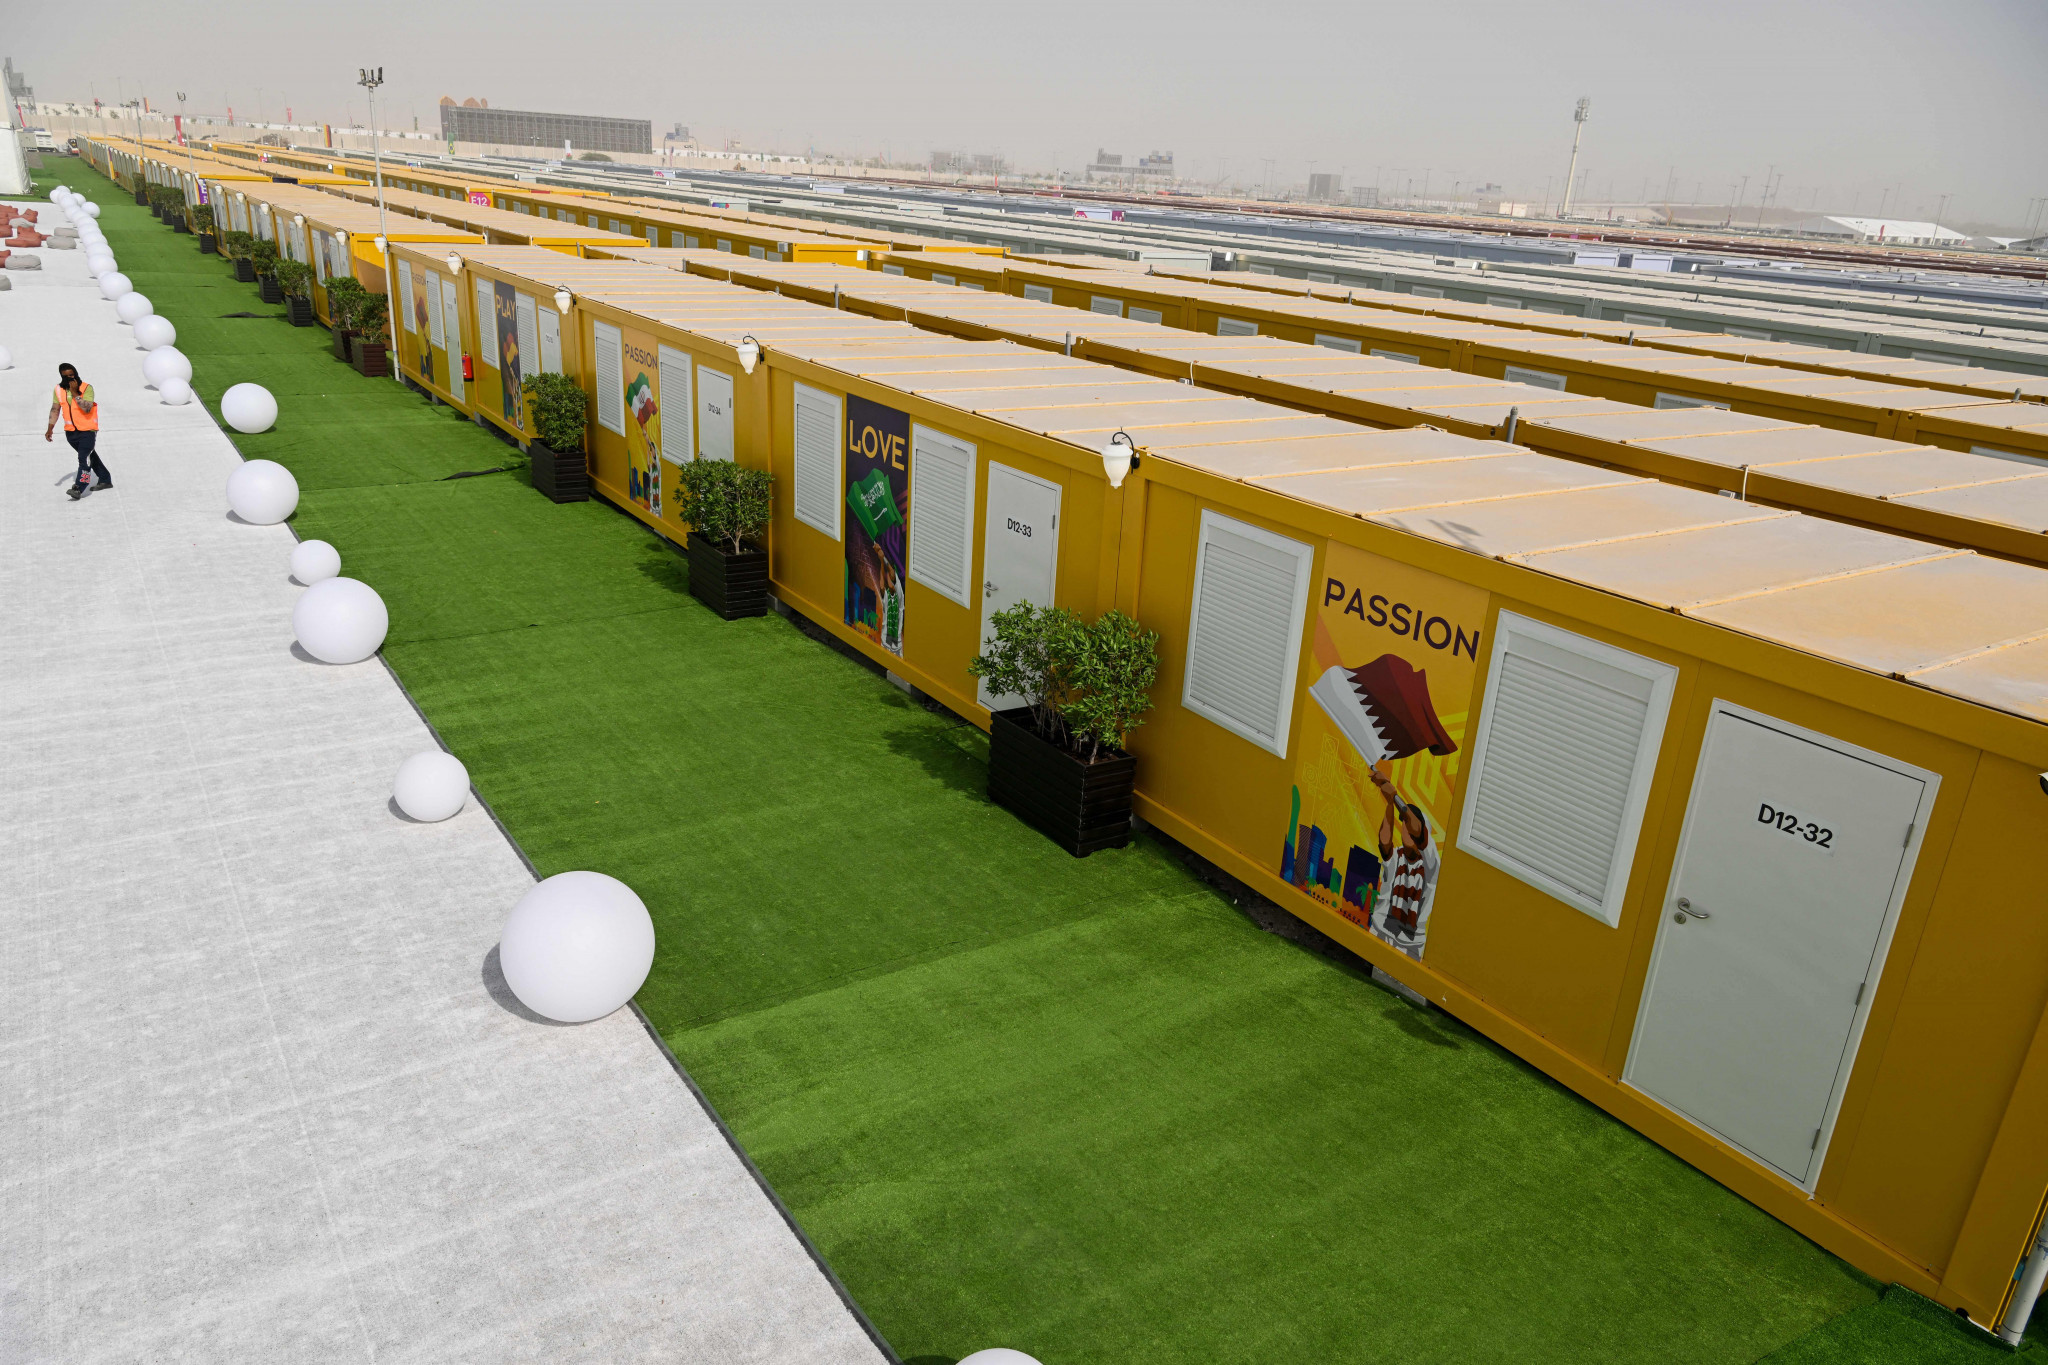 Qatar 2022 has created cabins for fans to stay in ©Getty Images